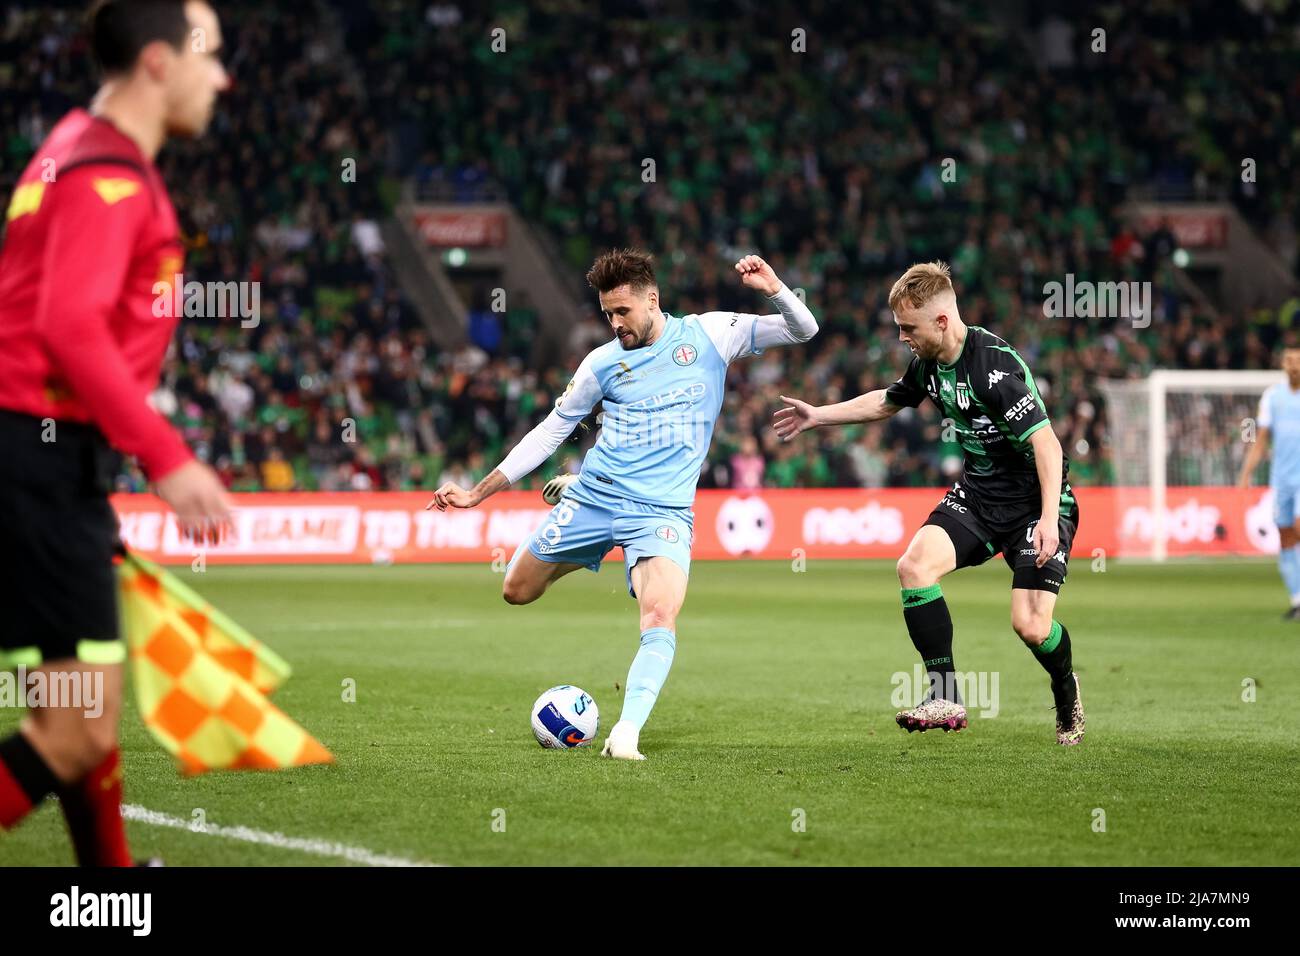 Melbourne, Australia, 28 May, 2022. Carl Jenkinson of Melbourne City FC during the A-League Grand Final soccer match between Melbourne City FC and Western United at AAMI Park on May 28, 2022 in Melbourne, Australia. Credit: Dave Hewison/Speed Media/Alamy Live News Stock Photo